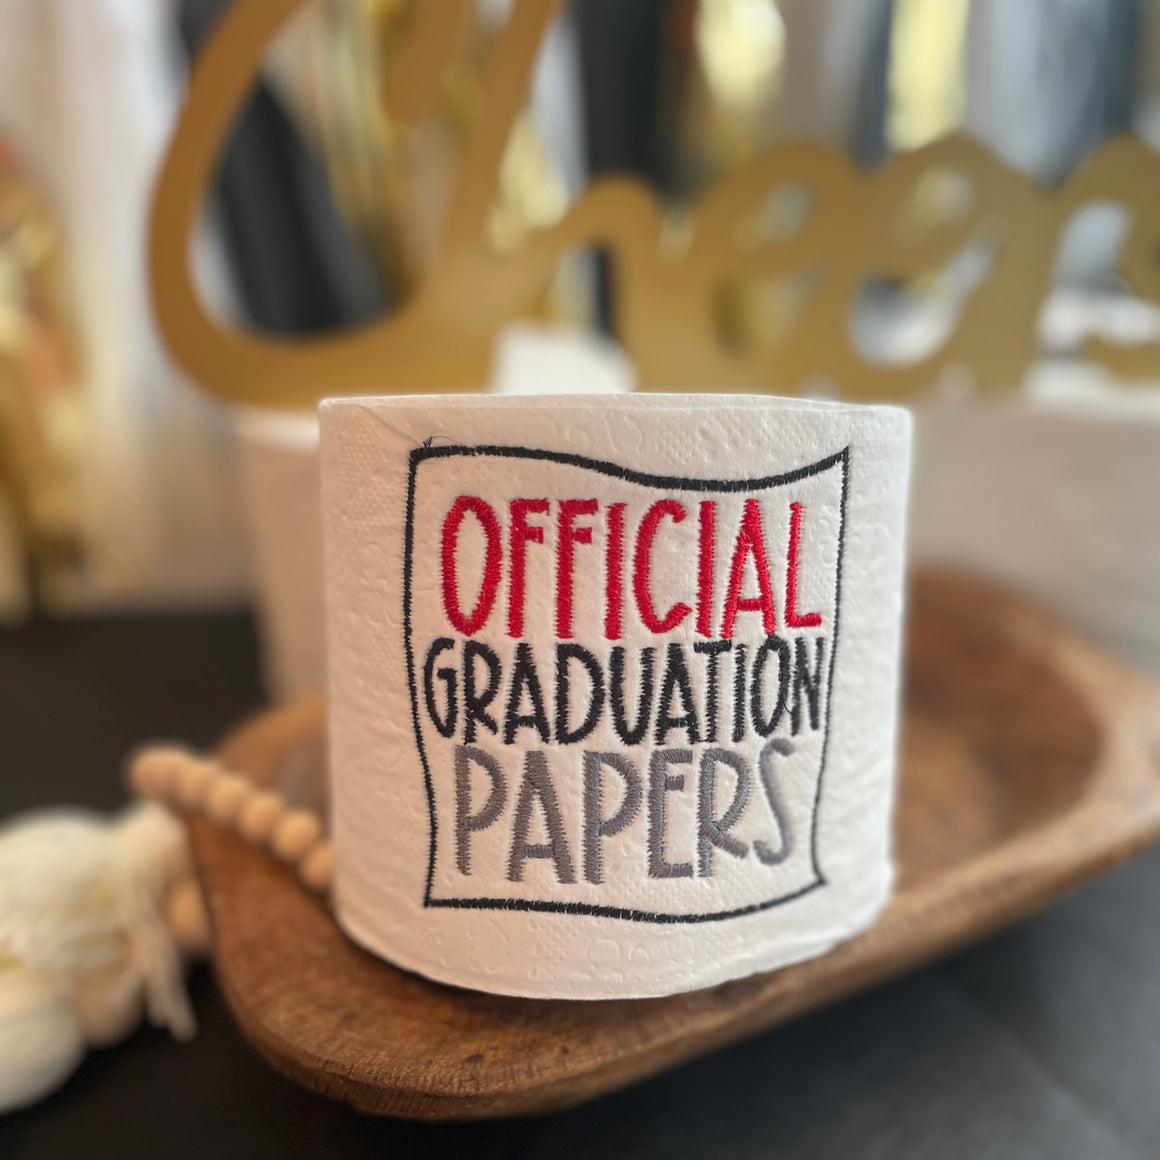 "Official Graduation Papers" Gag Toilet Paper